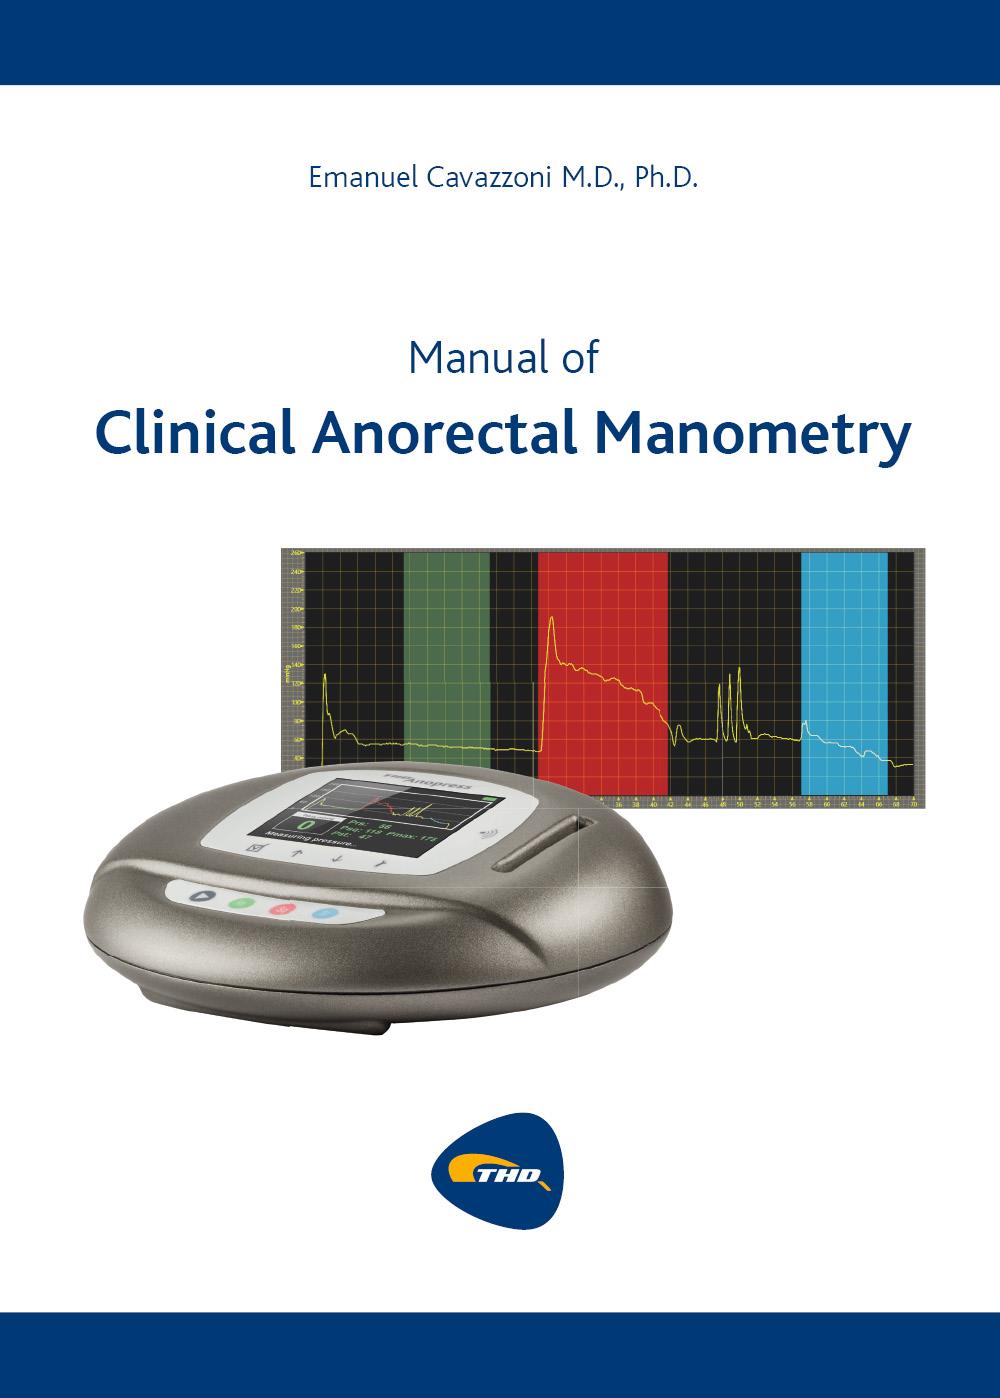 Manual of Clinical Anorectal Manometry